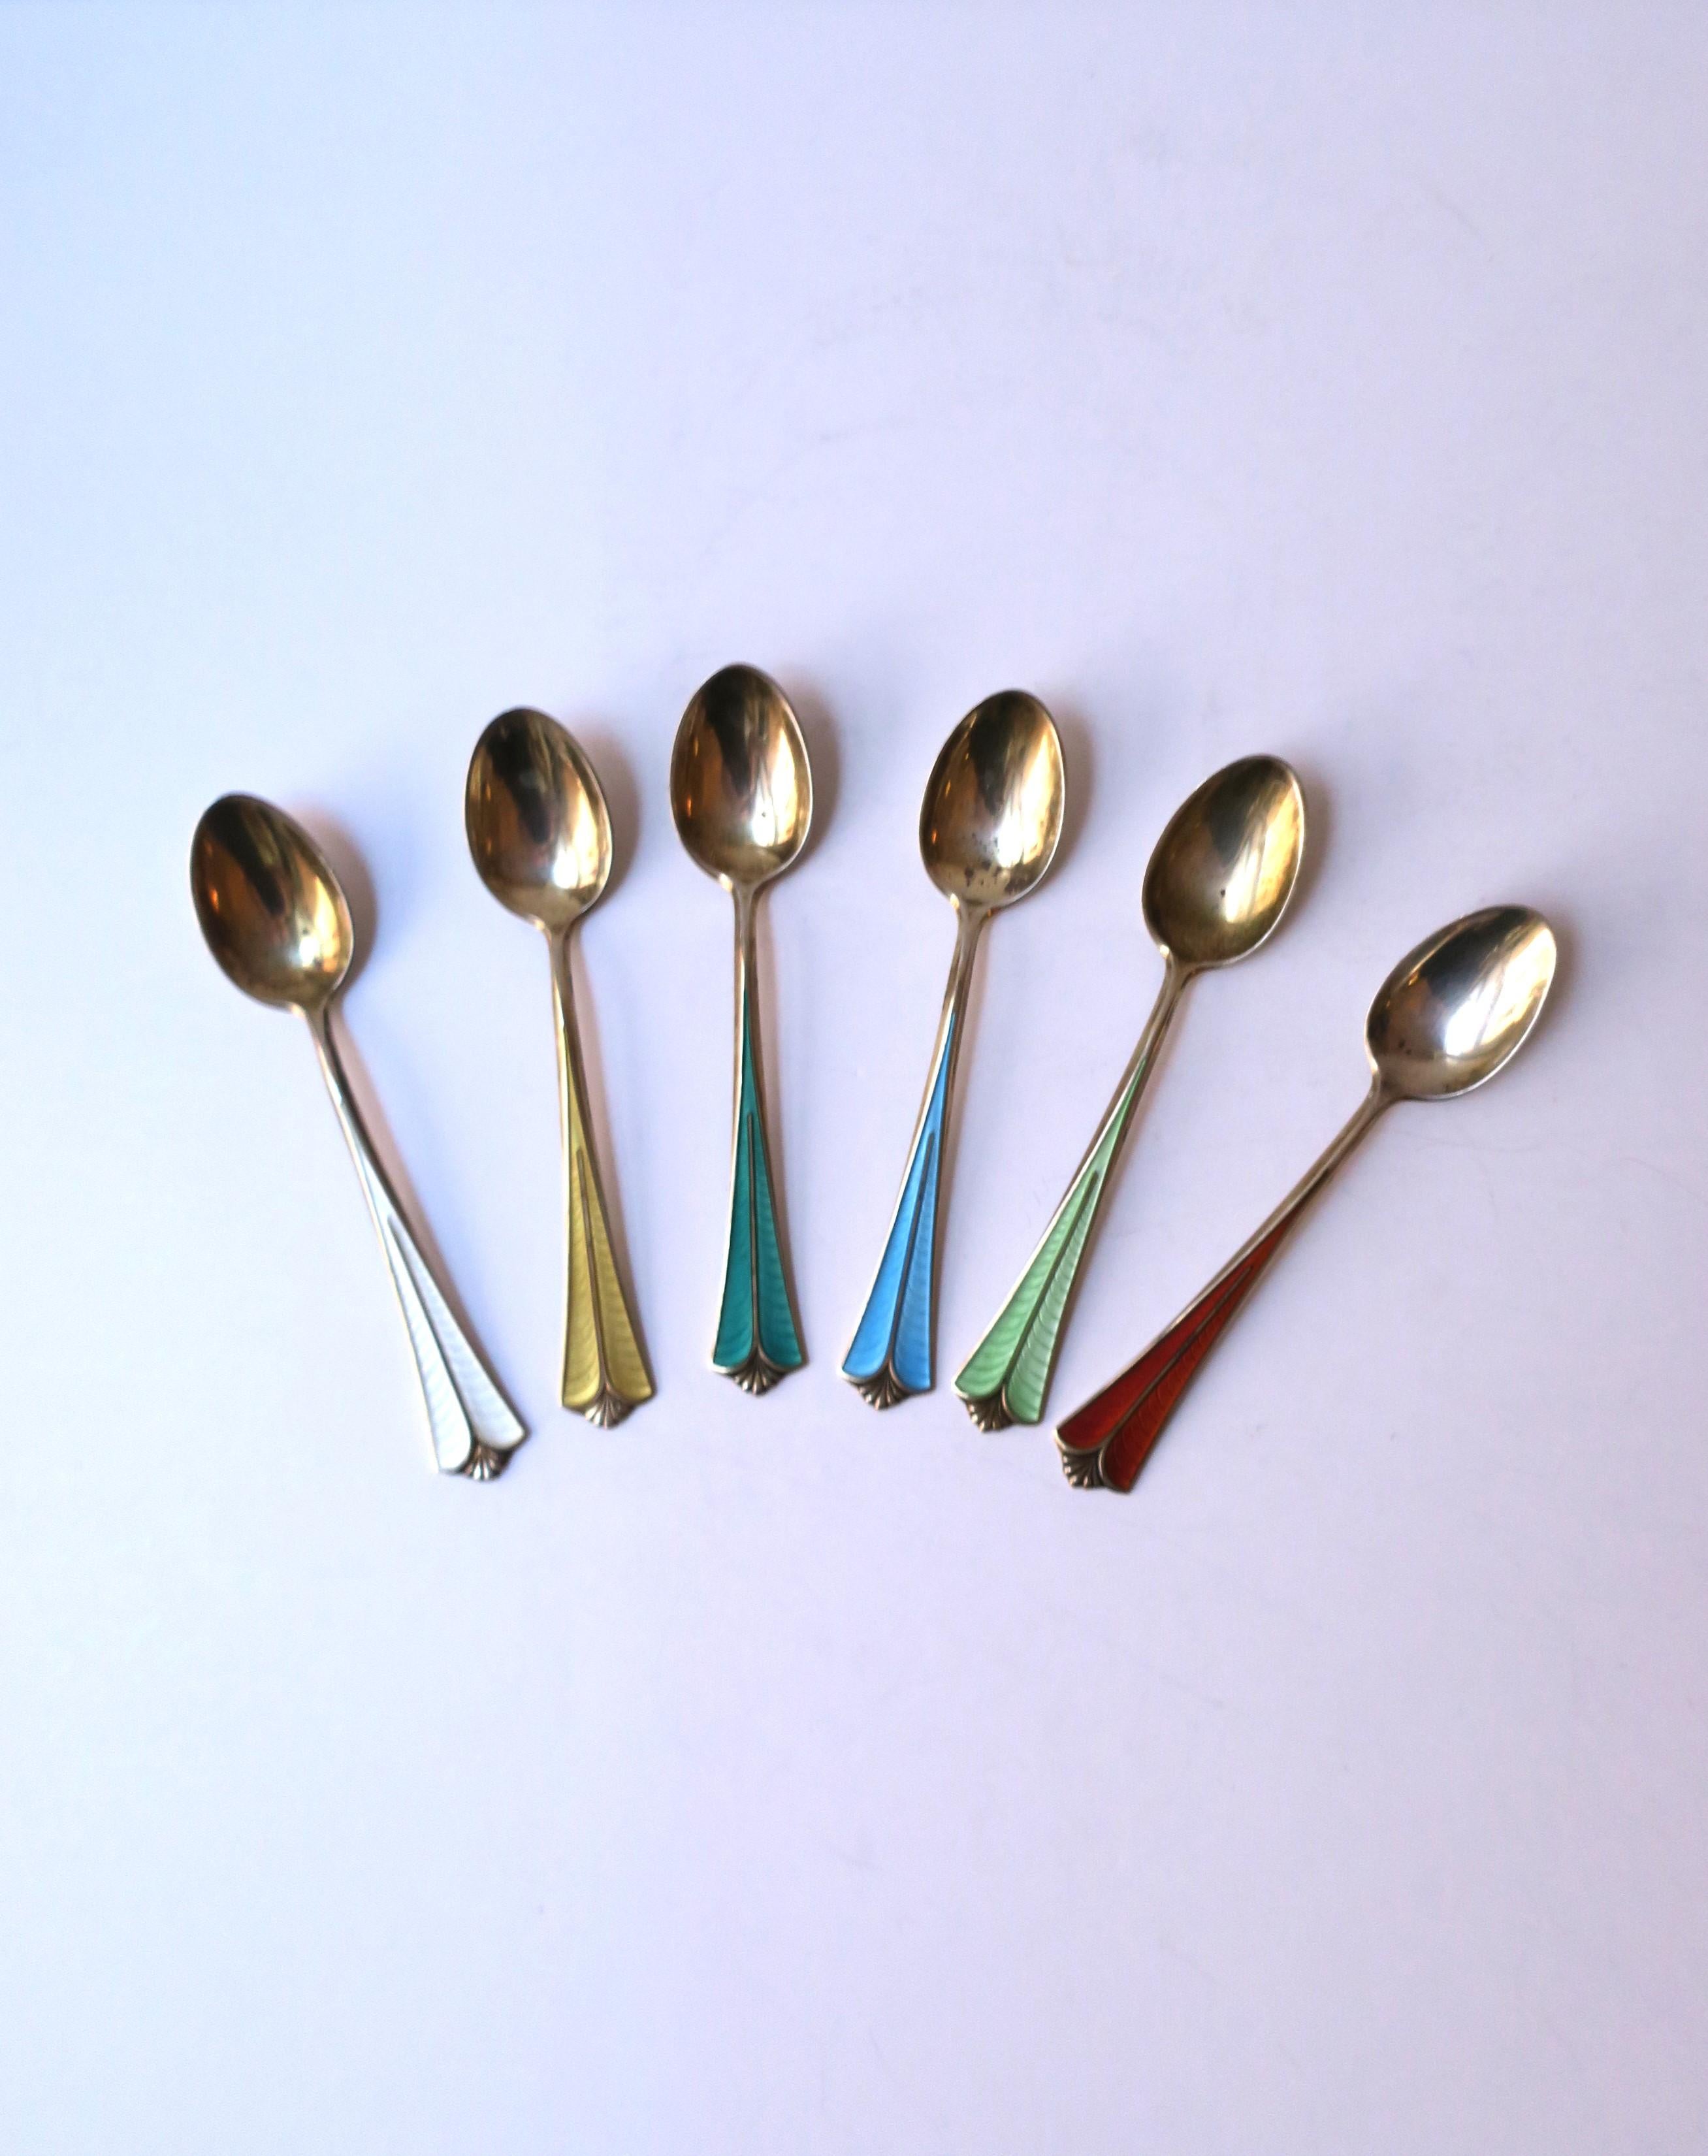 A beautiful set of six (6) sterling silver, gold gilt, and guilloche enamel espresso coffee or tea demitasse spoons from Norwegian silversmith firm, David Andersen, circa early-20th century, Norway. Firm was founded 1876 in Christiania (now Oslo),